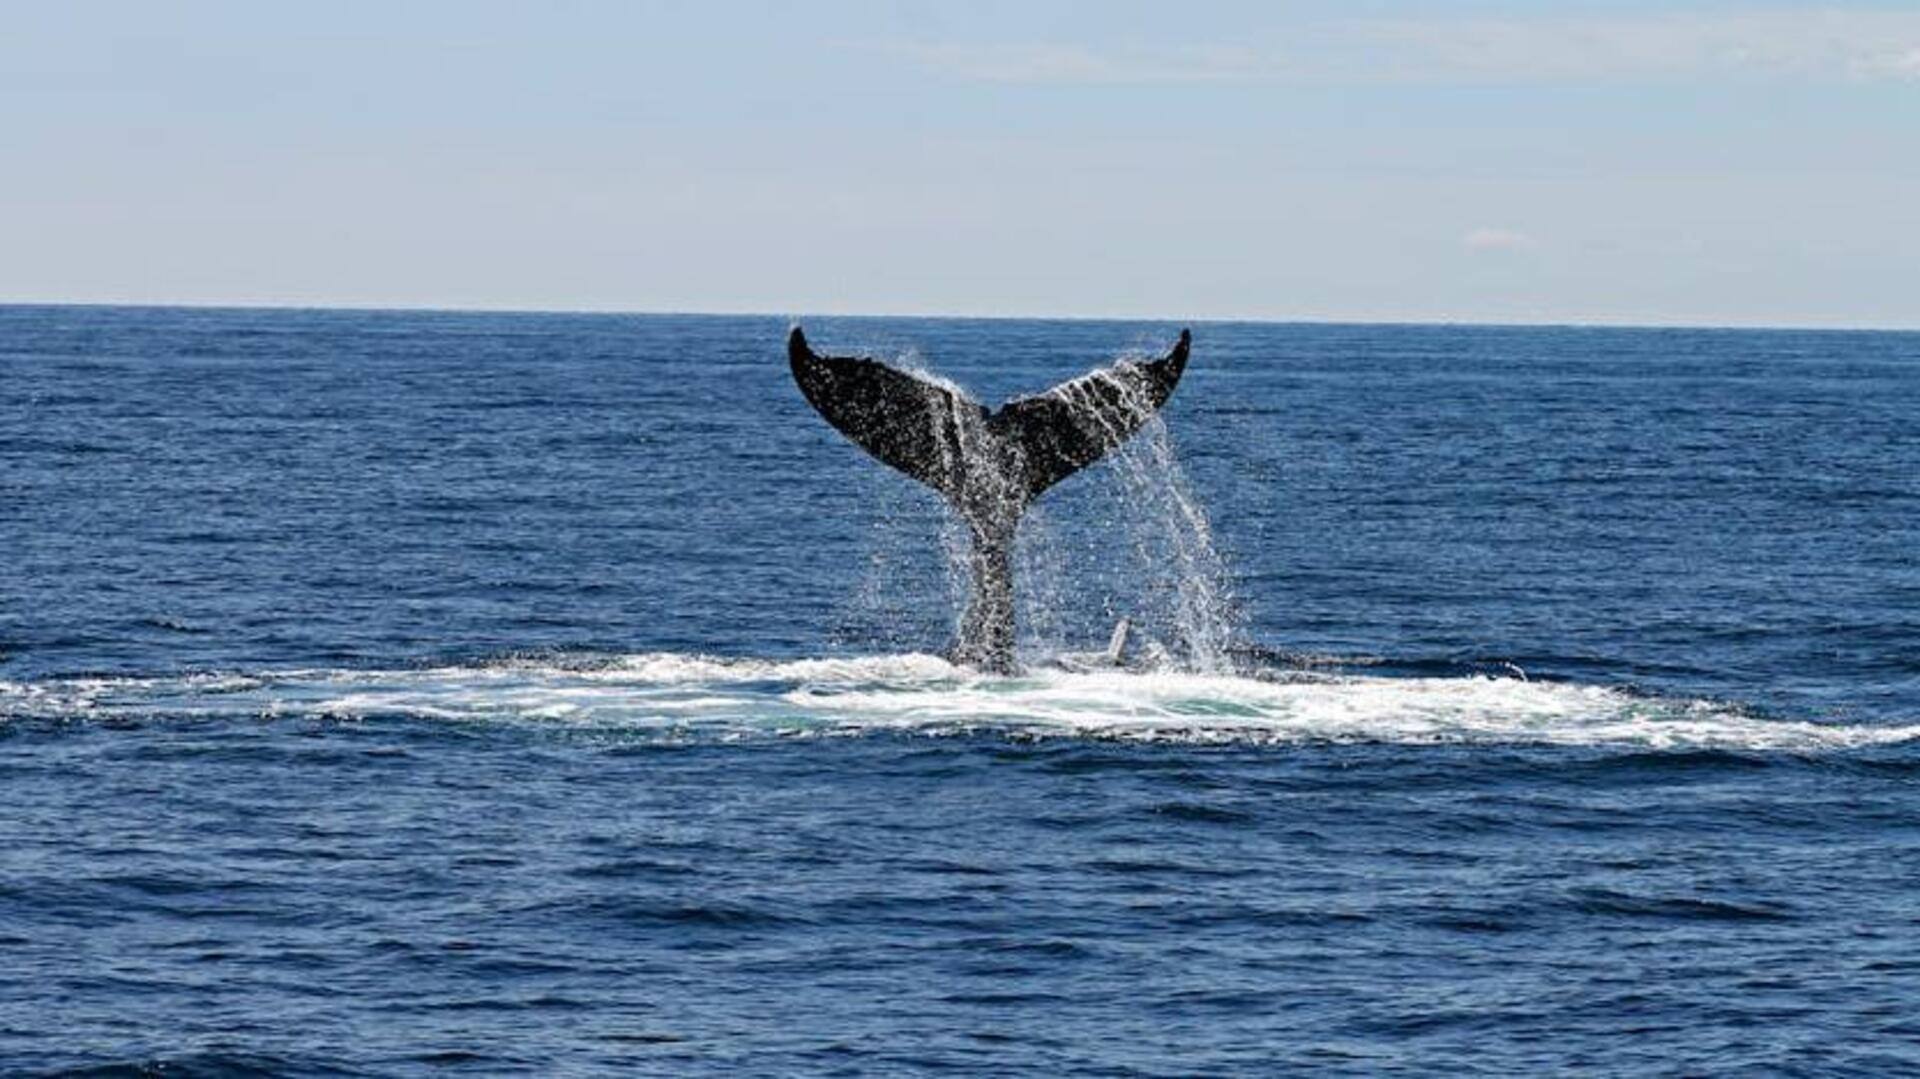 Head over to Cape Town's whale-watching escapes